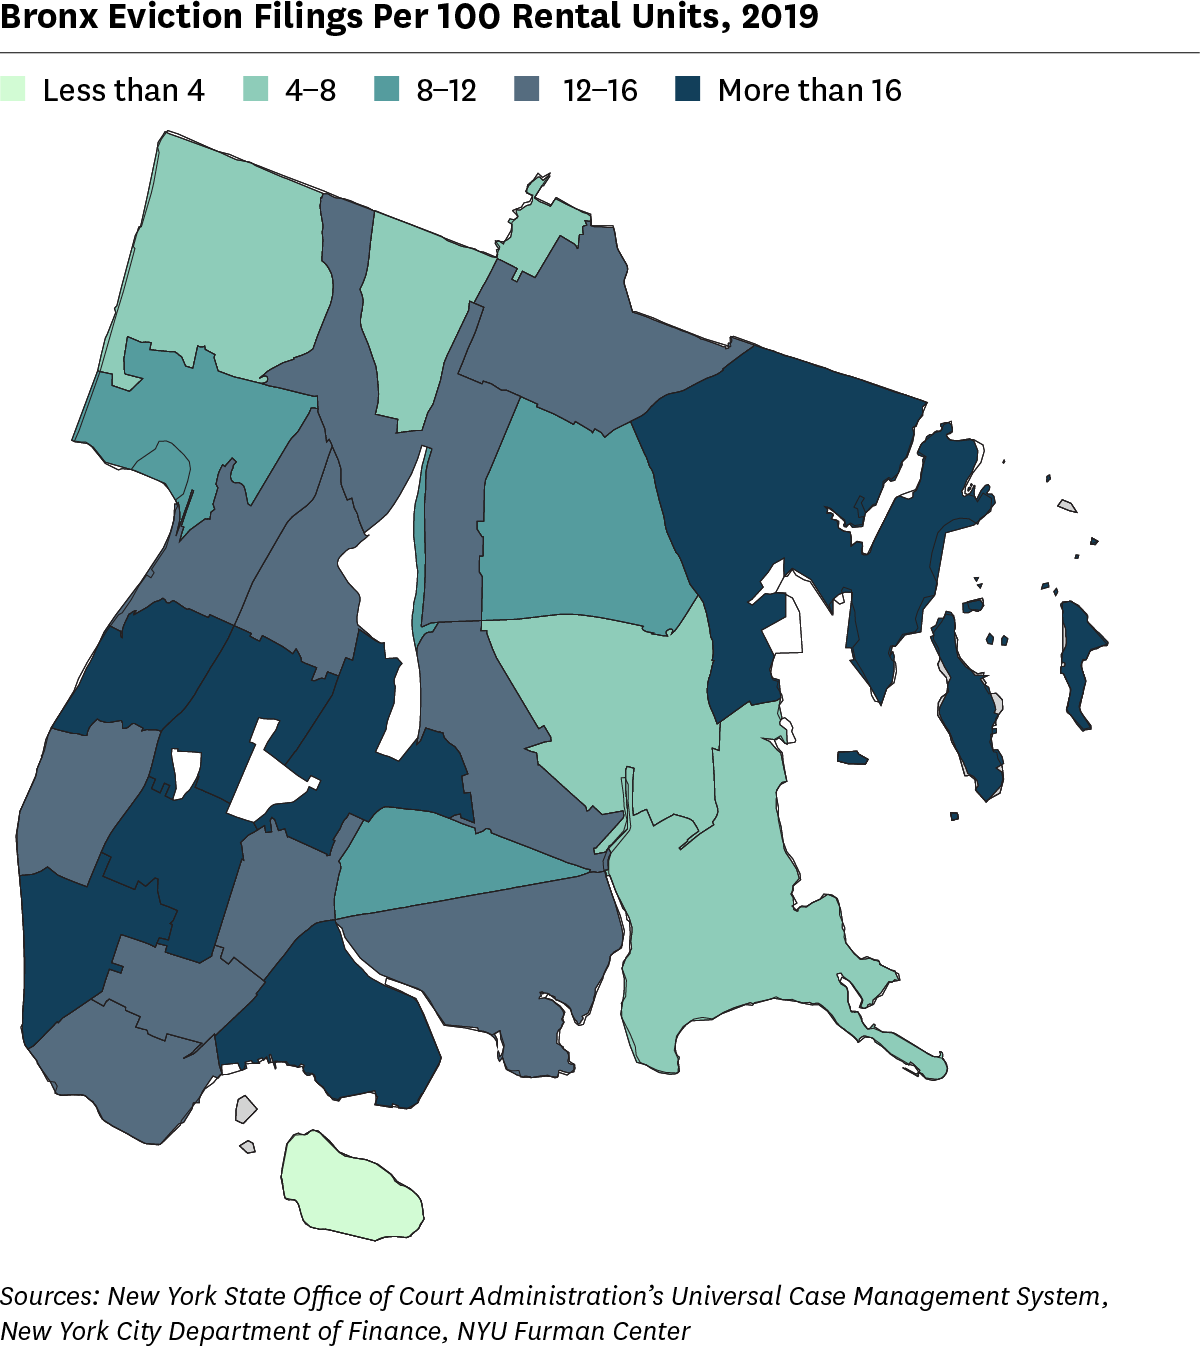 Map showing 2019 eviction filing rates for ZIP Code areas in The Bronx